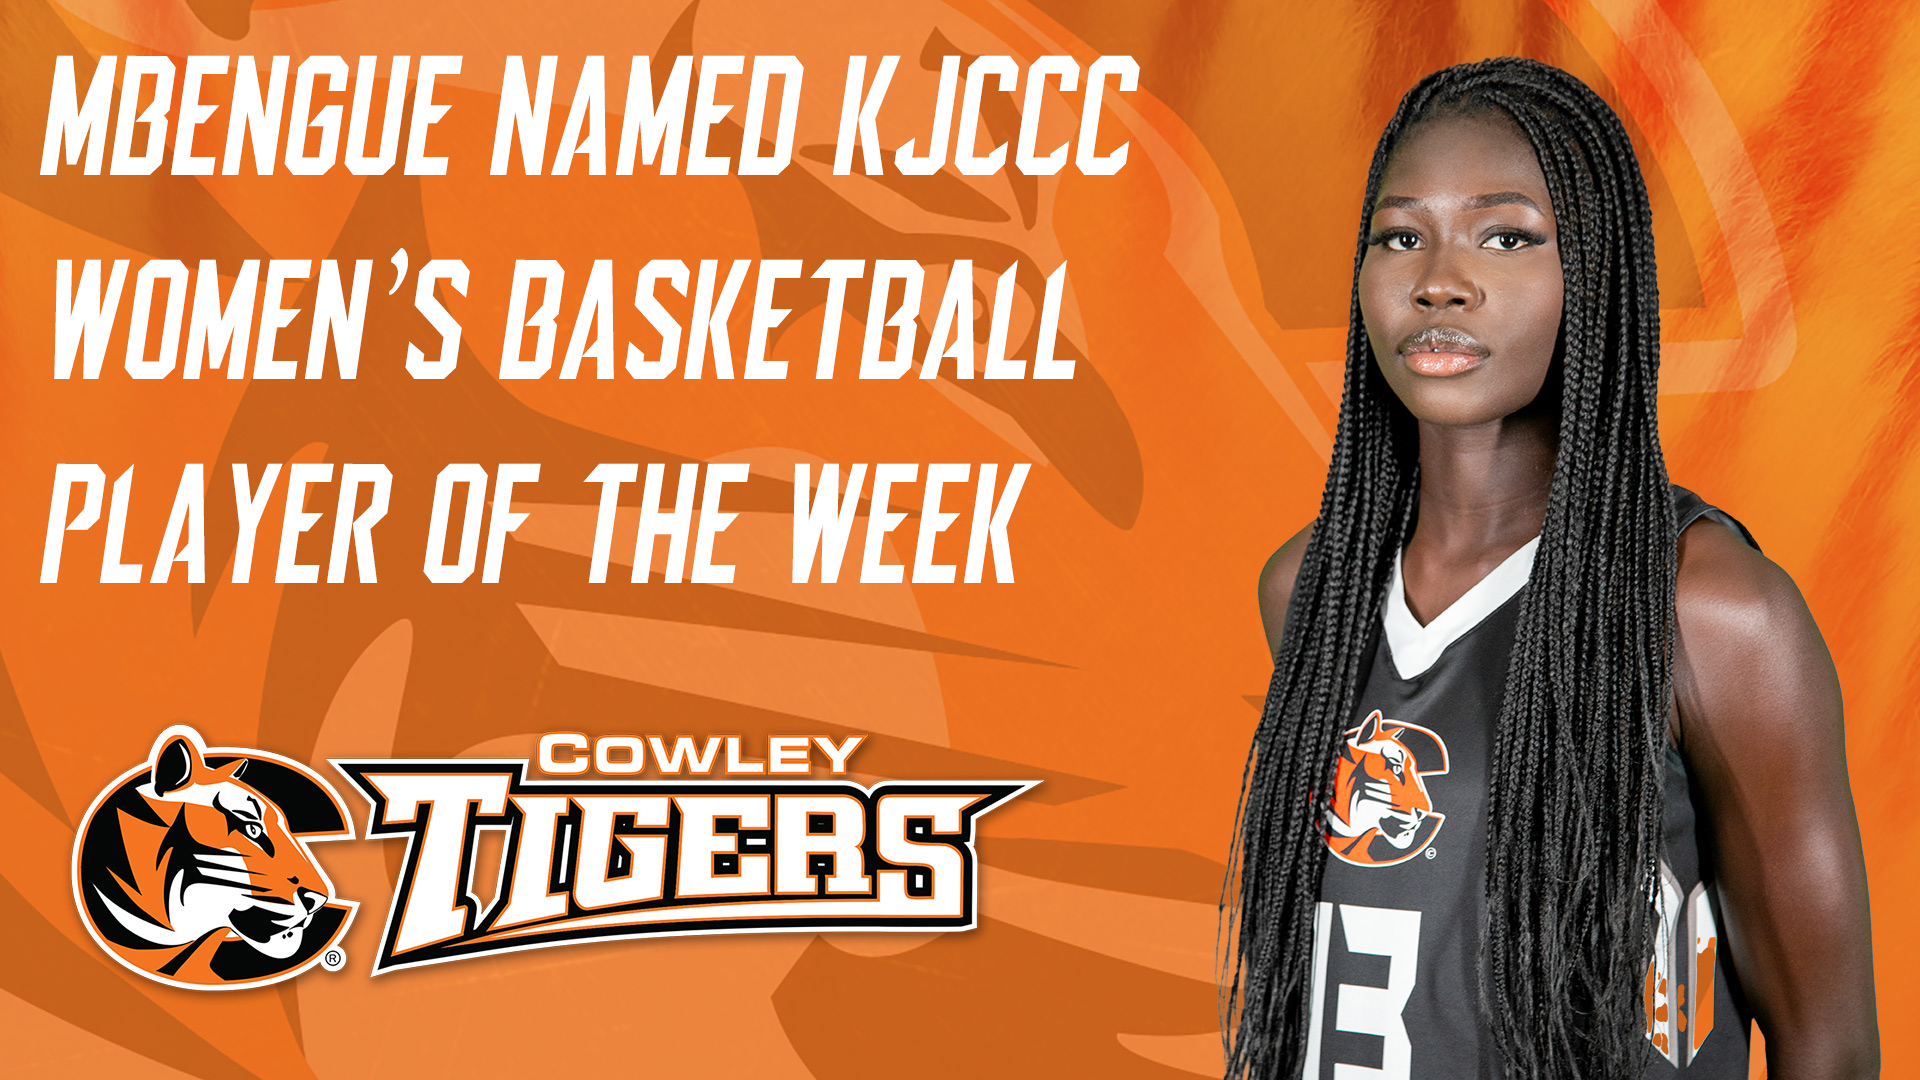 Mbengue named KJCCC Player of the Week